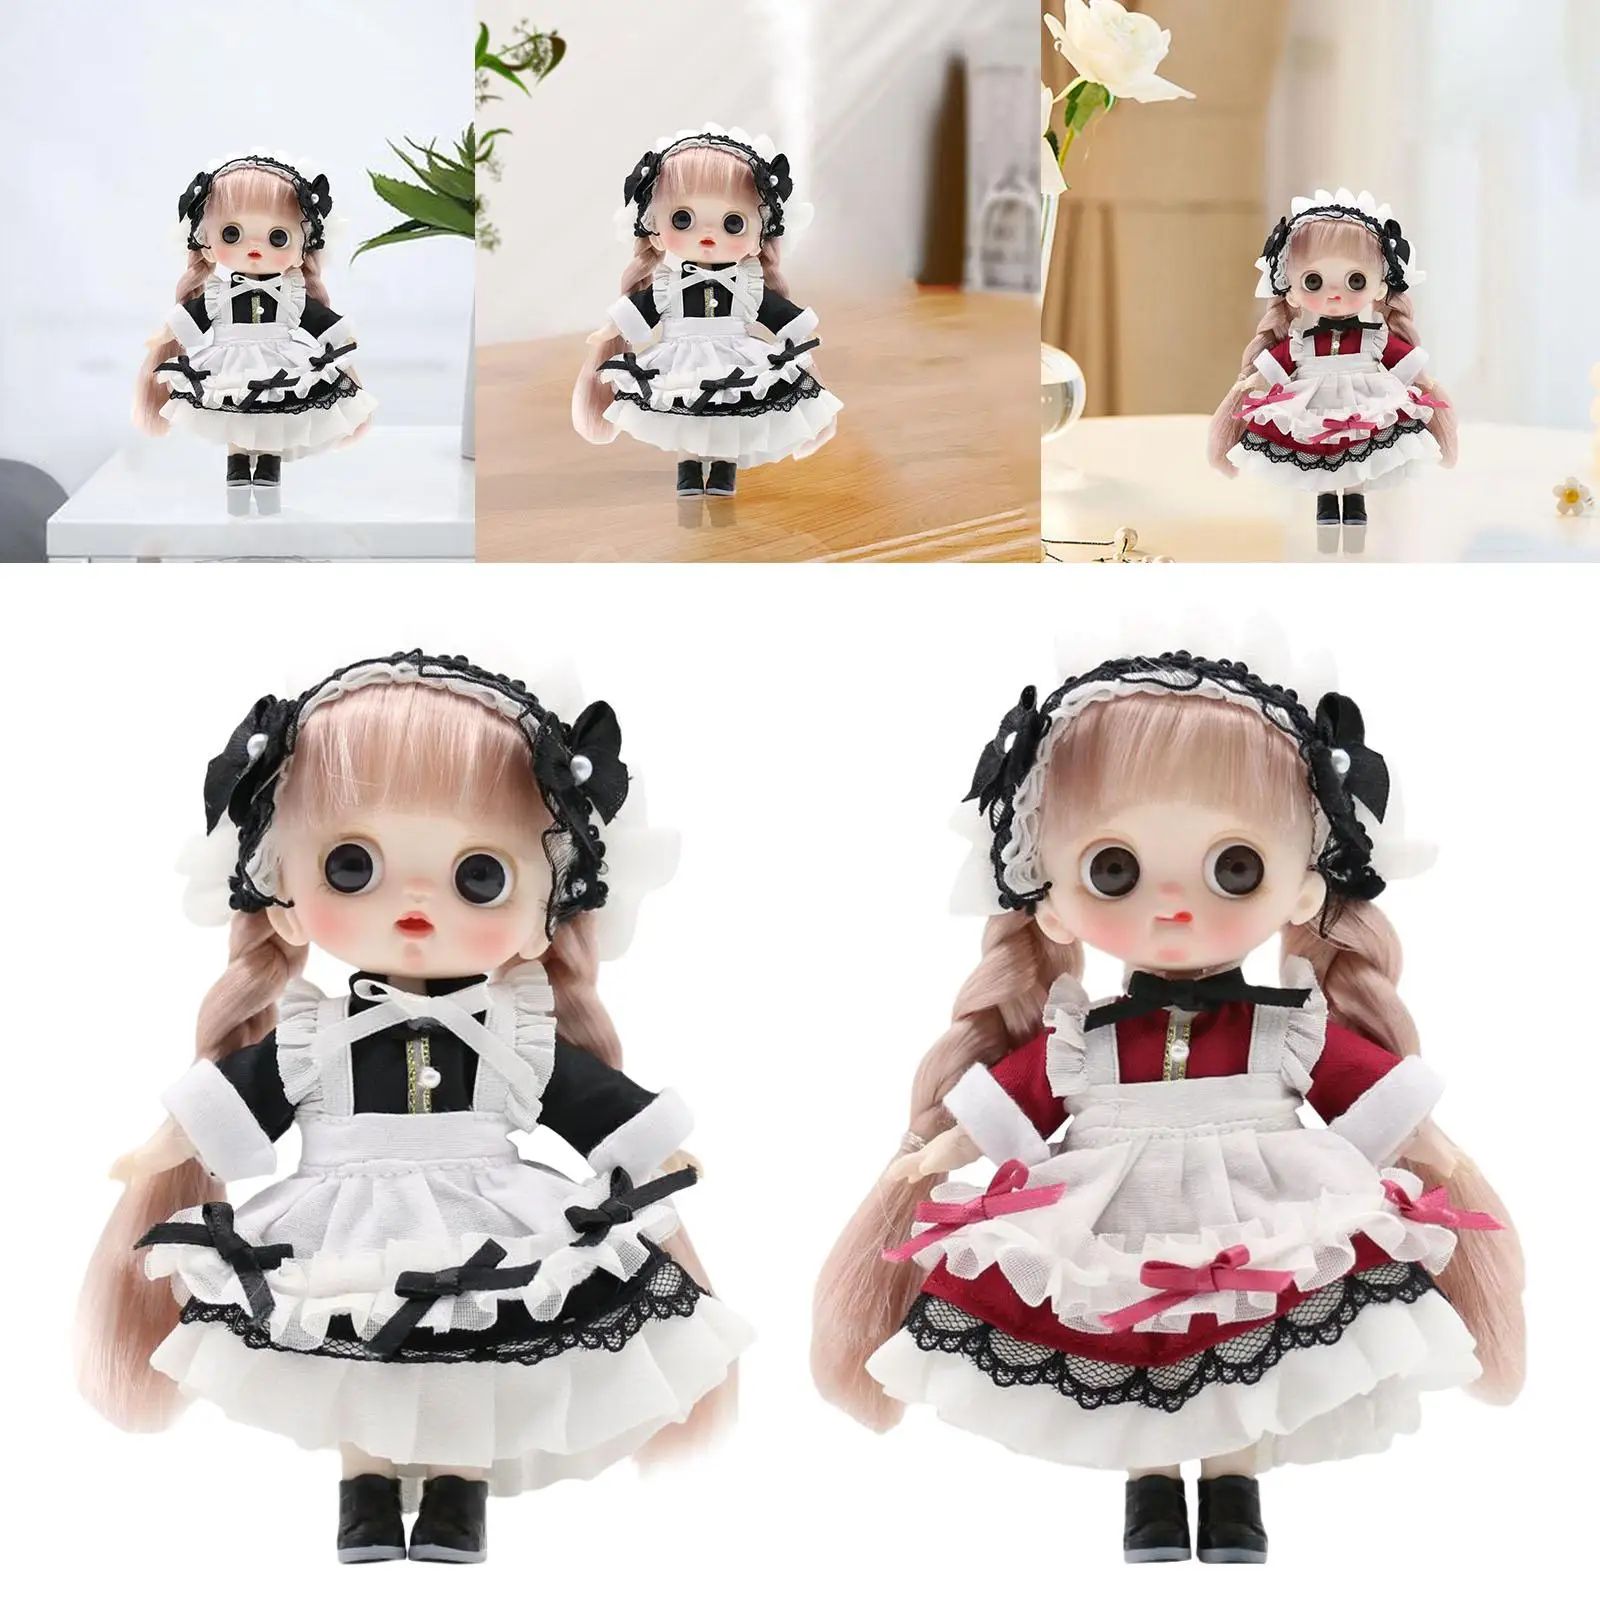 Ball Jointed Baby Doll Kids Girls Toys Makeup Doll Dress up Accessories Flexible Joint Doll Makeup Doll for Graduation Valentine